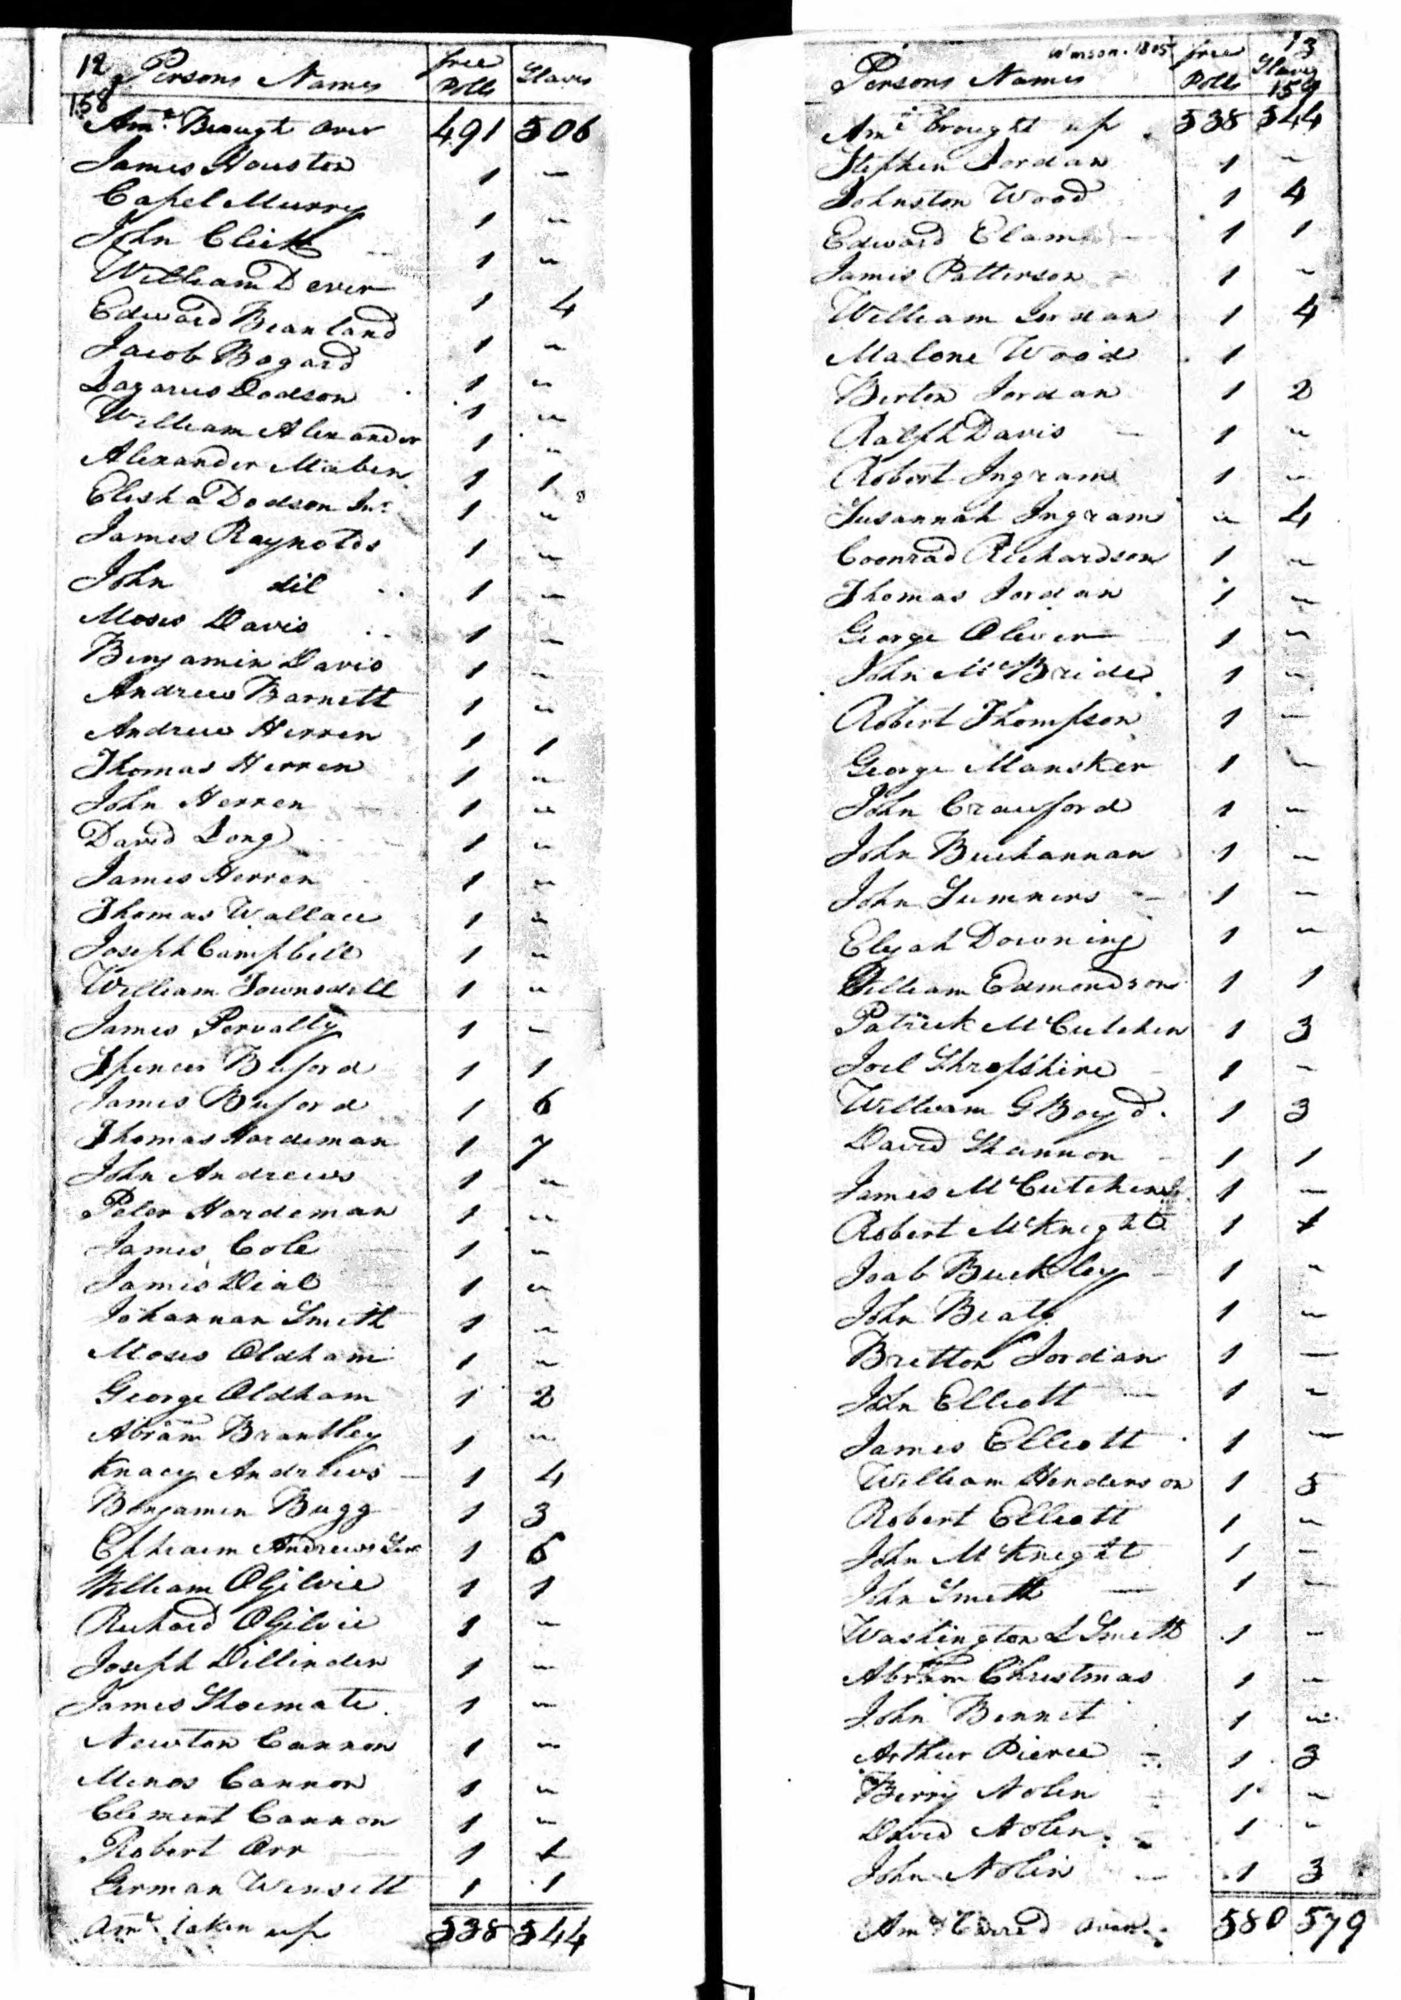 1805 Williamson County, Tennessee, Early Tax List Records, 1783-1895 for William Jordan